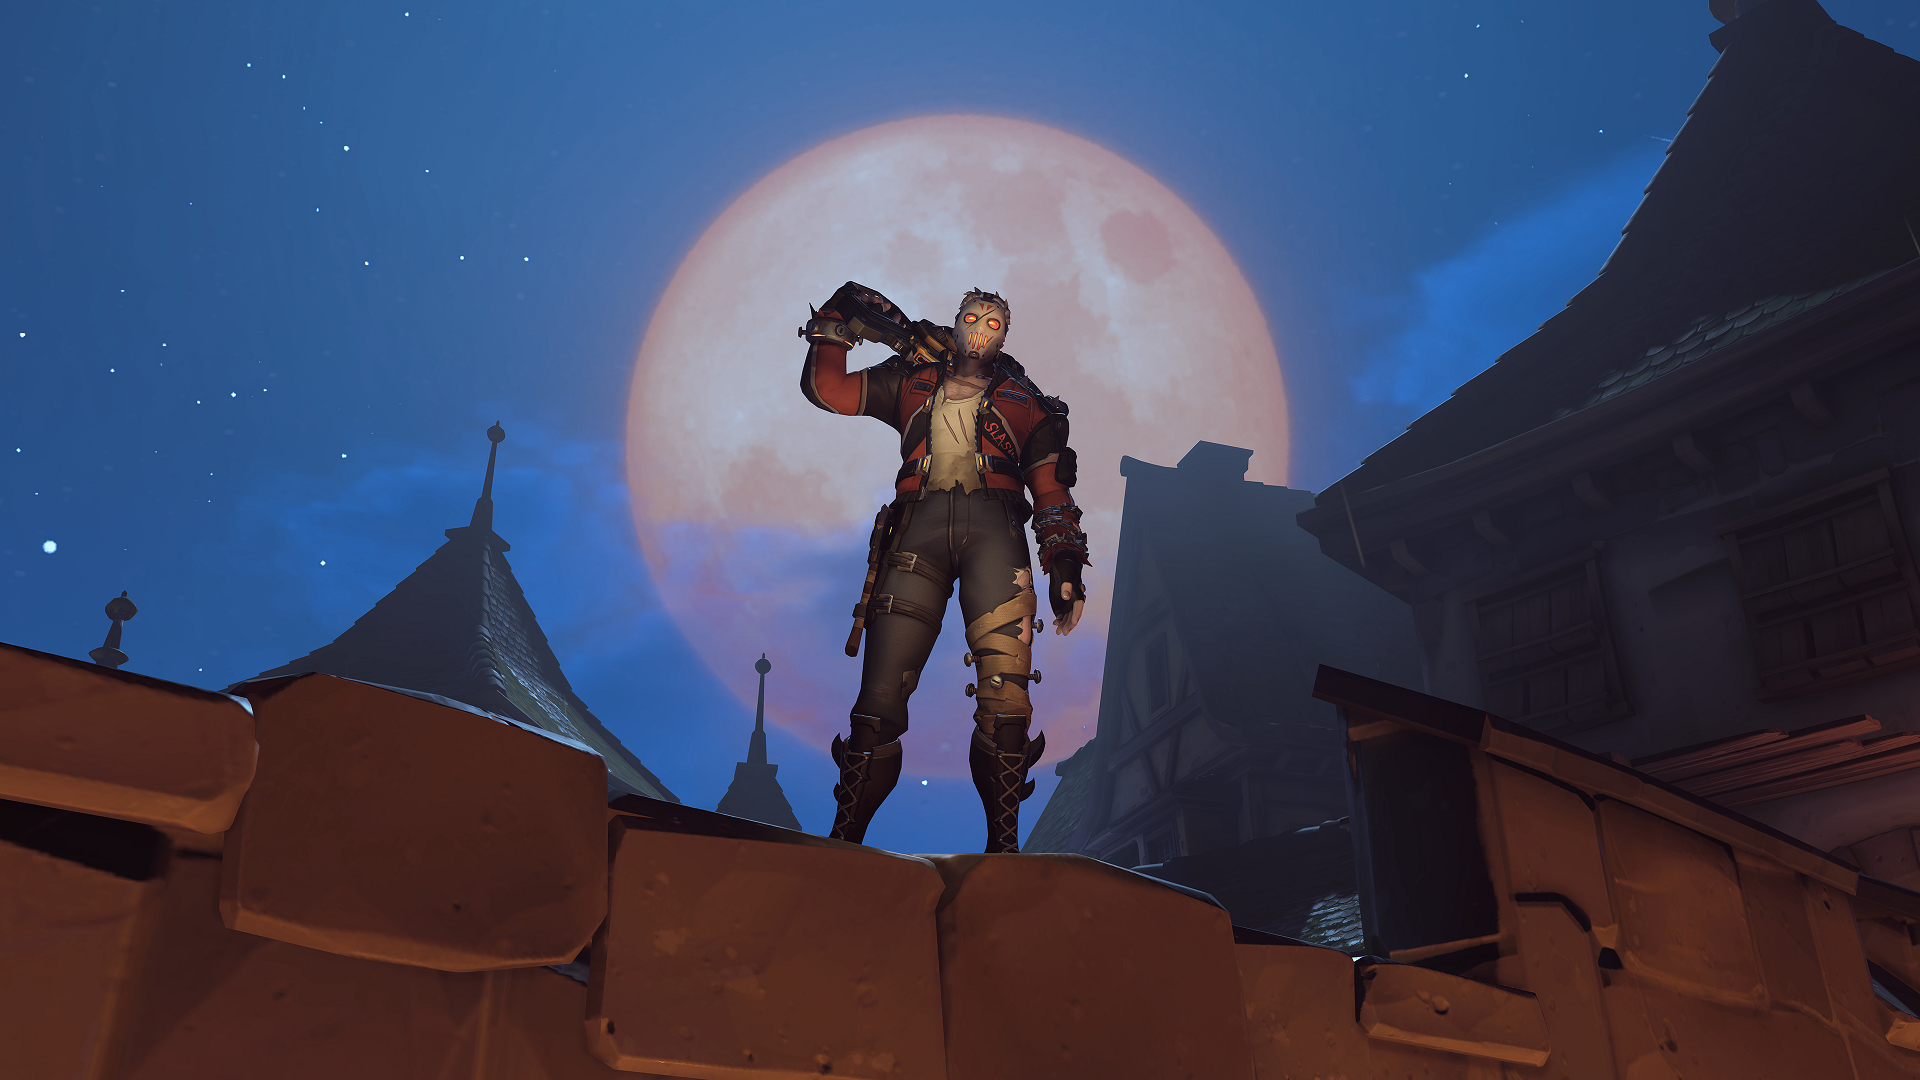 Here’s every Overwatch Halloween Terror skin in one place ... - 1920 x 1080 png 1756kB